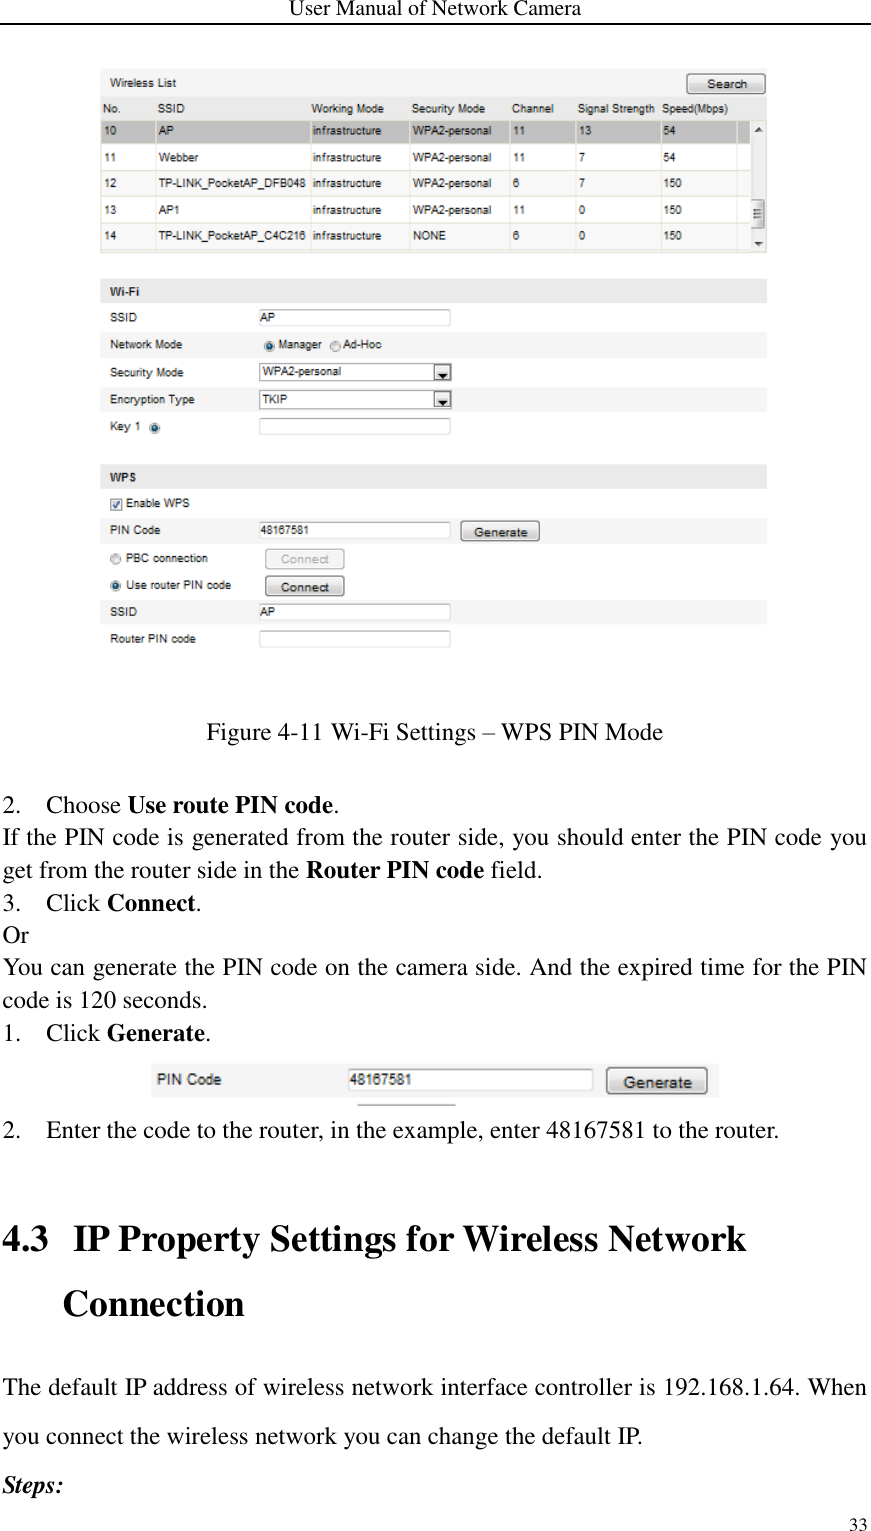 User Manual of Network Camera 33   Figure 4-11 Wi-Fi Settings – WPS PIN Mode  2. Choose Use route PIN code. If the PIN code is generated from the router side, you should enter the PIN code you get from the router side in the Router PIN code field. 3. Click Connect. Or You can generate the PIN code on the camera side. And the expired time for the PIN code is 120 seconds. 1. Click Generate.  2. Enter the code to the router, in the example, enter 48167581 to the router.  4.3 IP Property Settings for Wireless Network Connection The default IP address of wireless network interface controller is 192.168.1.64. When you connect the wireless network you can change the default IP. Steps: 